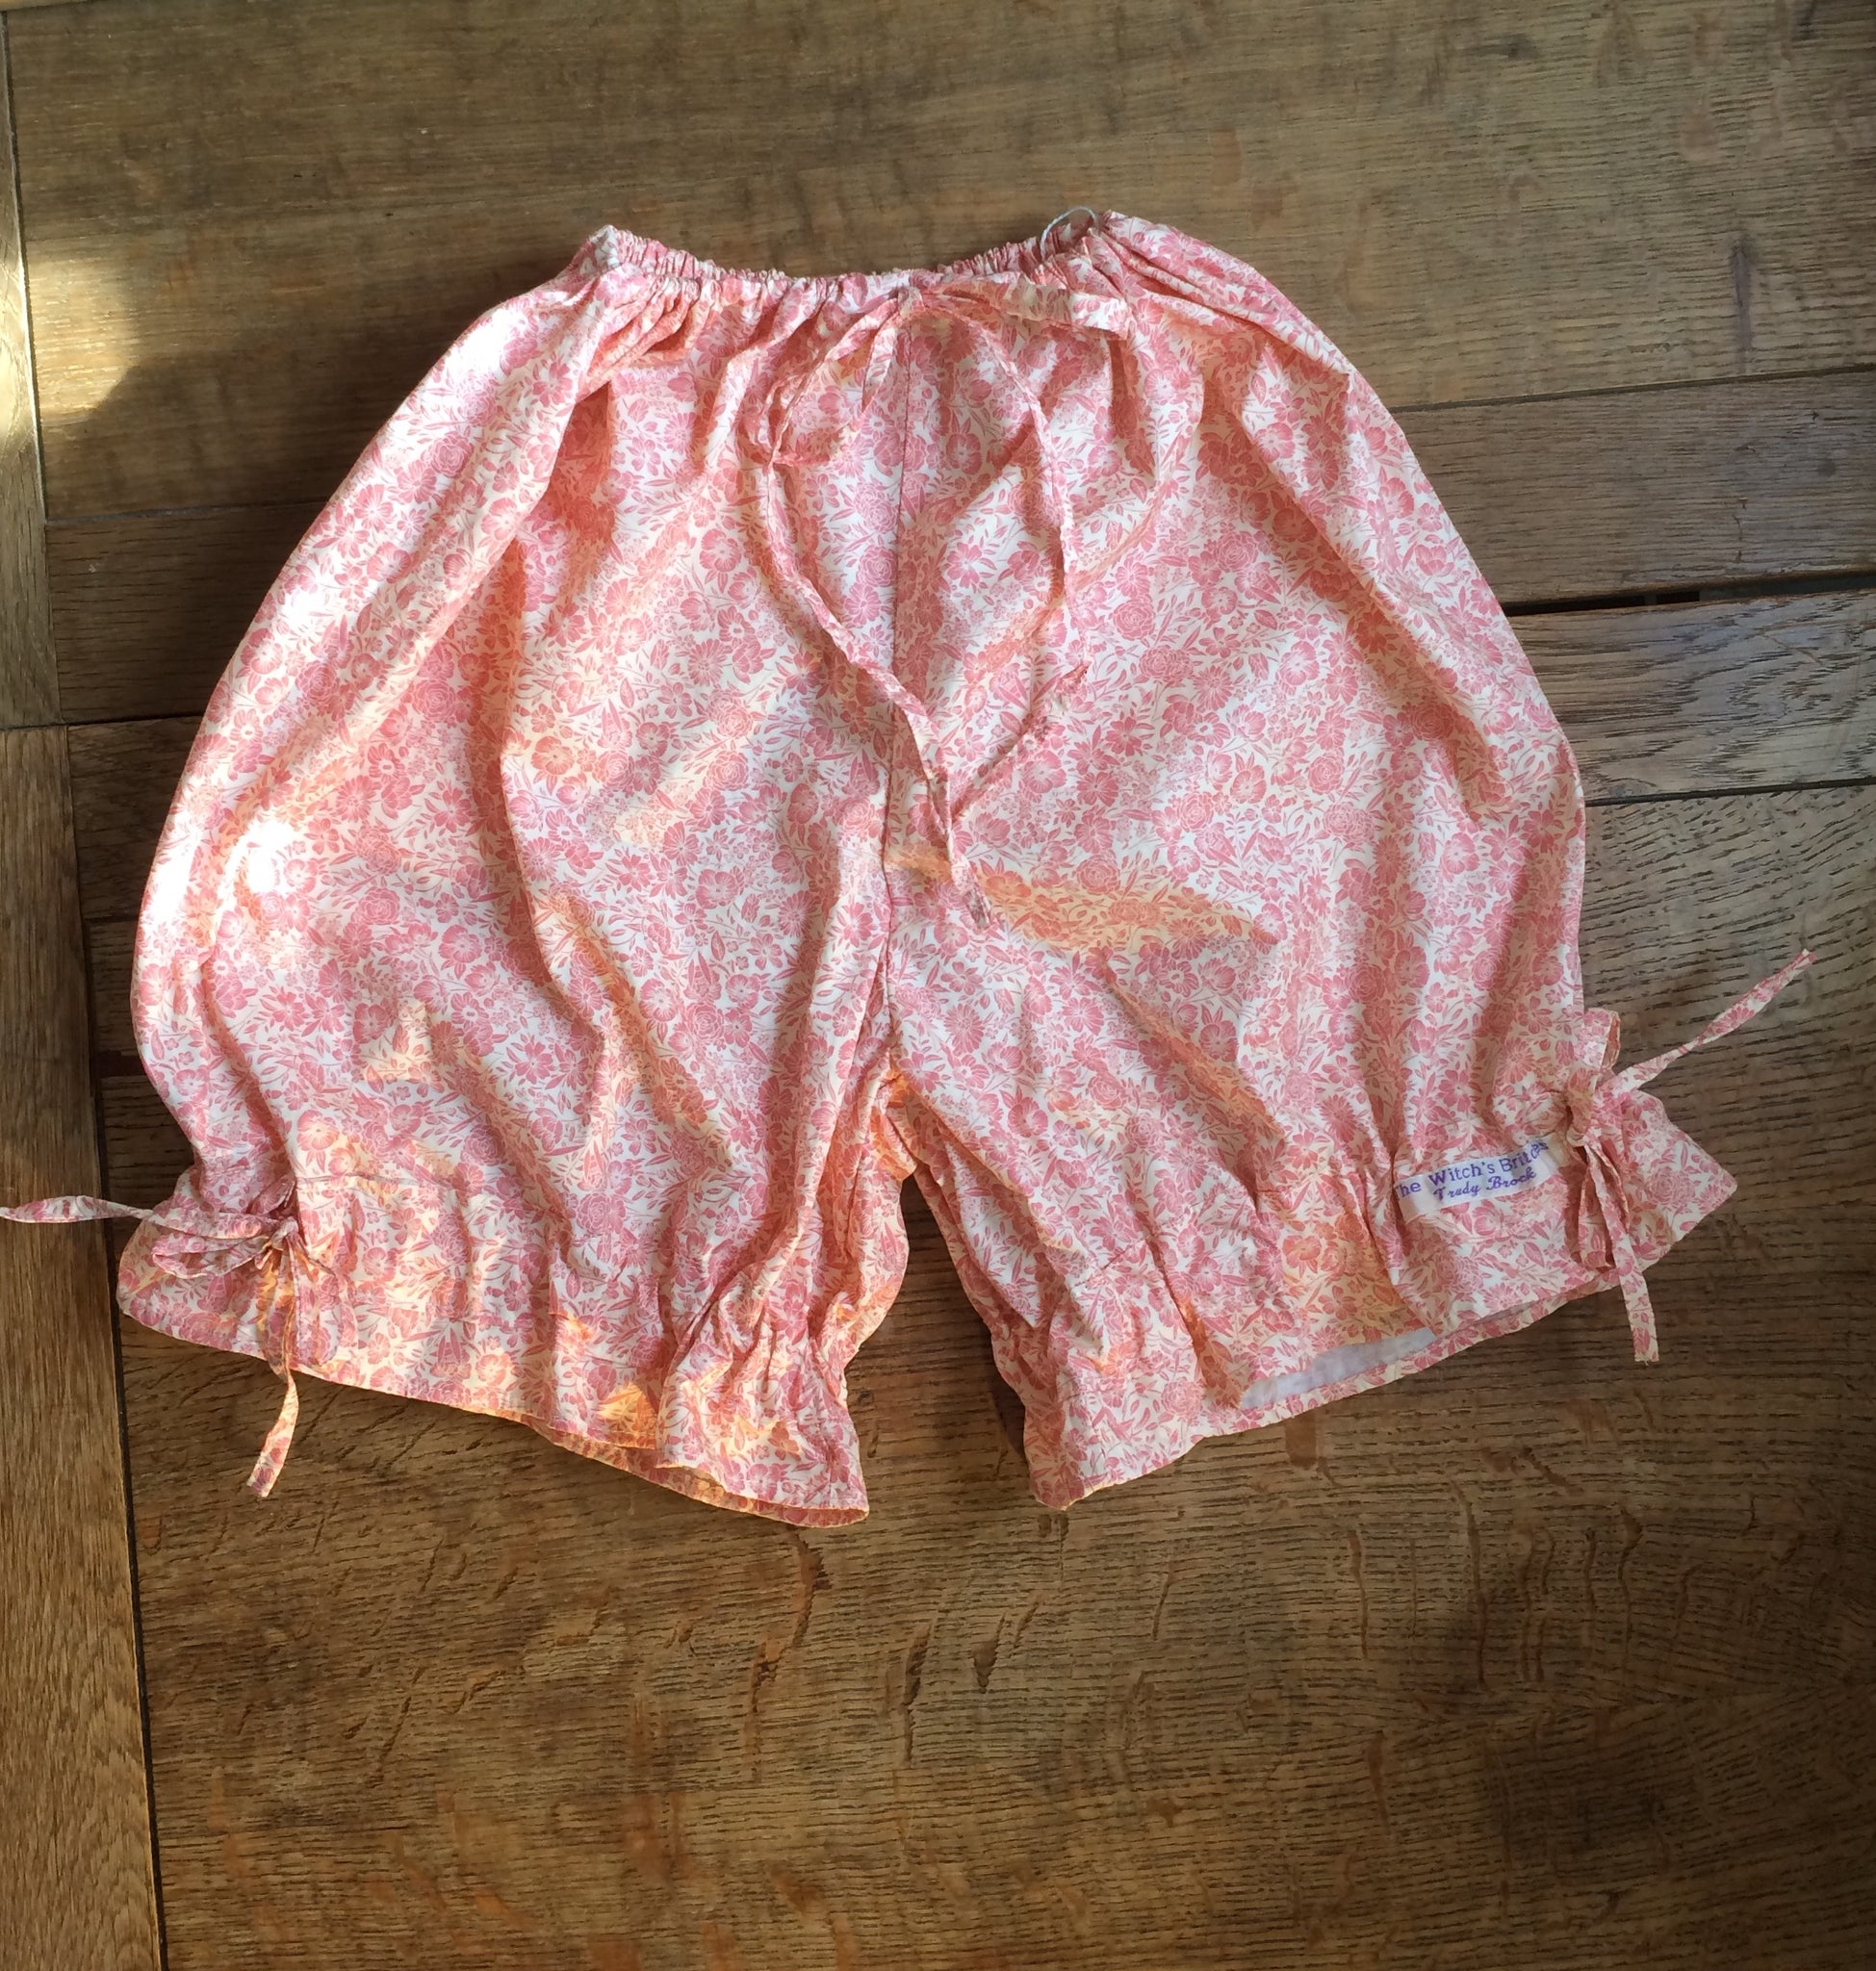 Peaches and cream floral cotton short bloomers (40”)